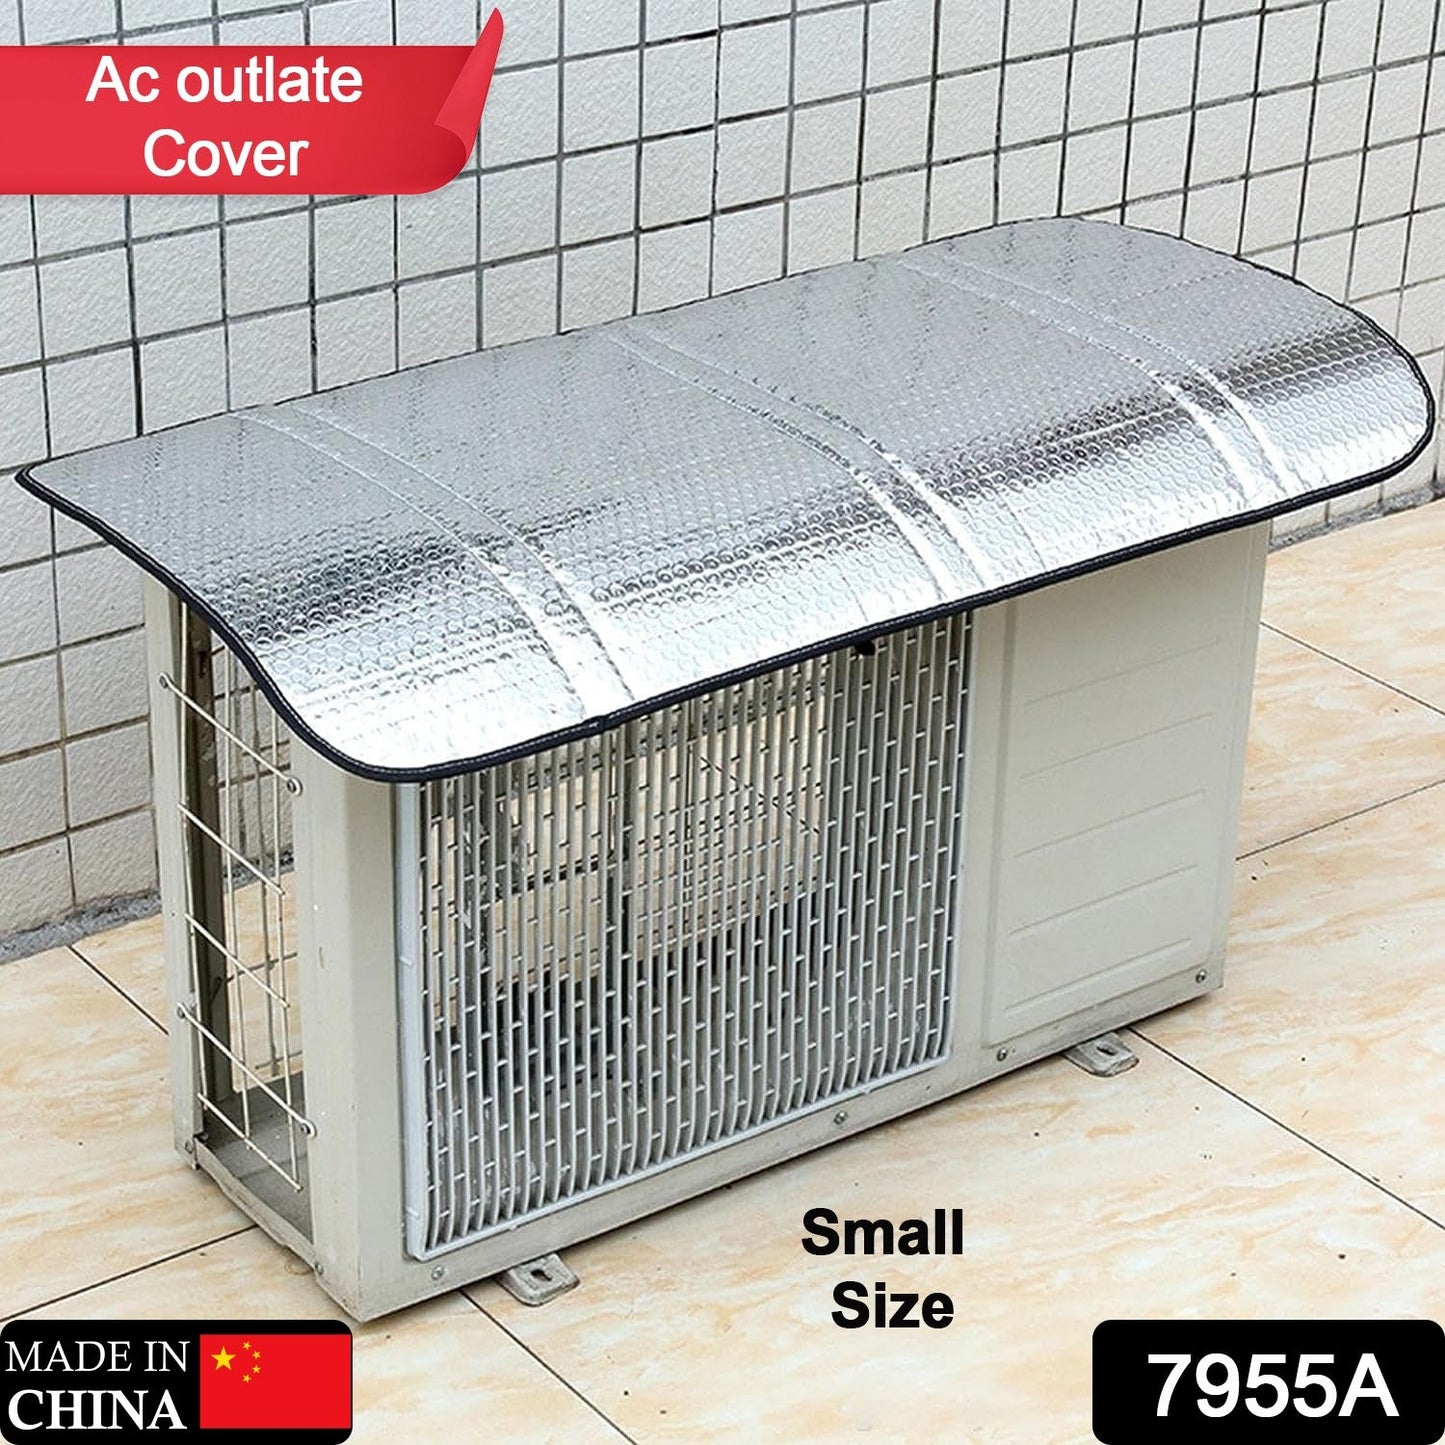 7955A Air Conditioner Outdoor Unit Cover, Outdoor Unit Protective Cover, Aluminum Foil Material, Sun, Rain, Snow, Wind, Dust, Protects Outdoor Units Cover (Small)